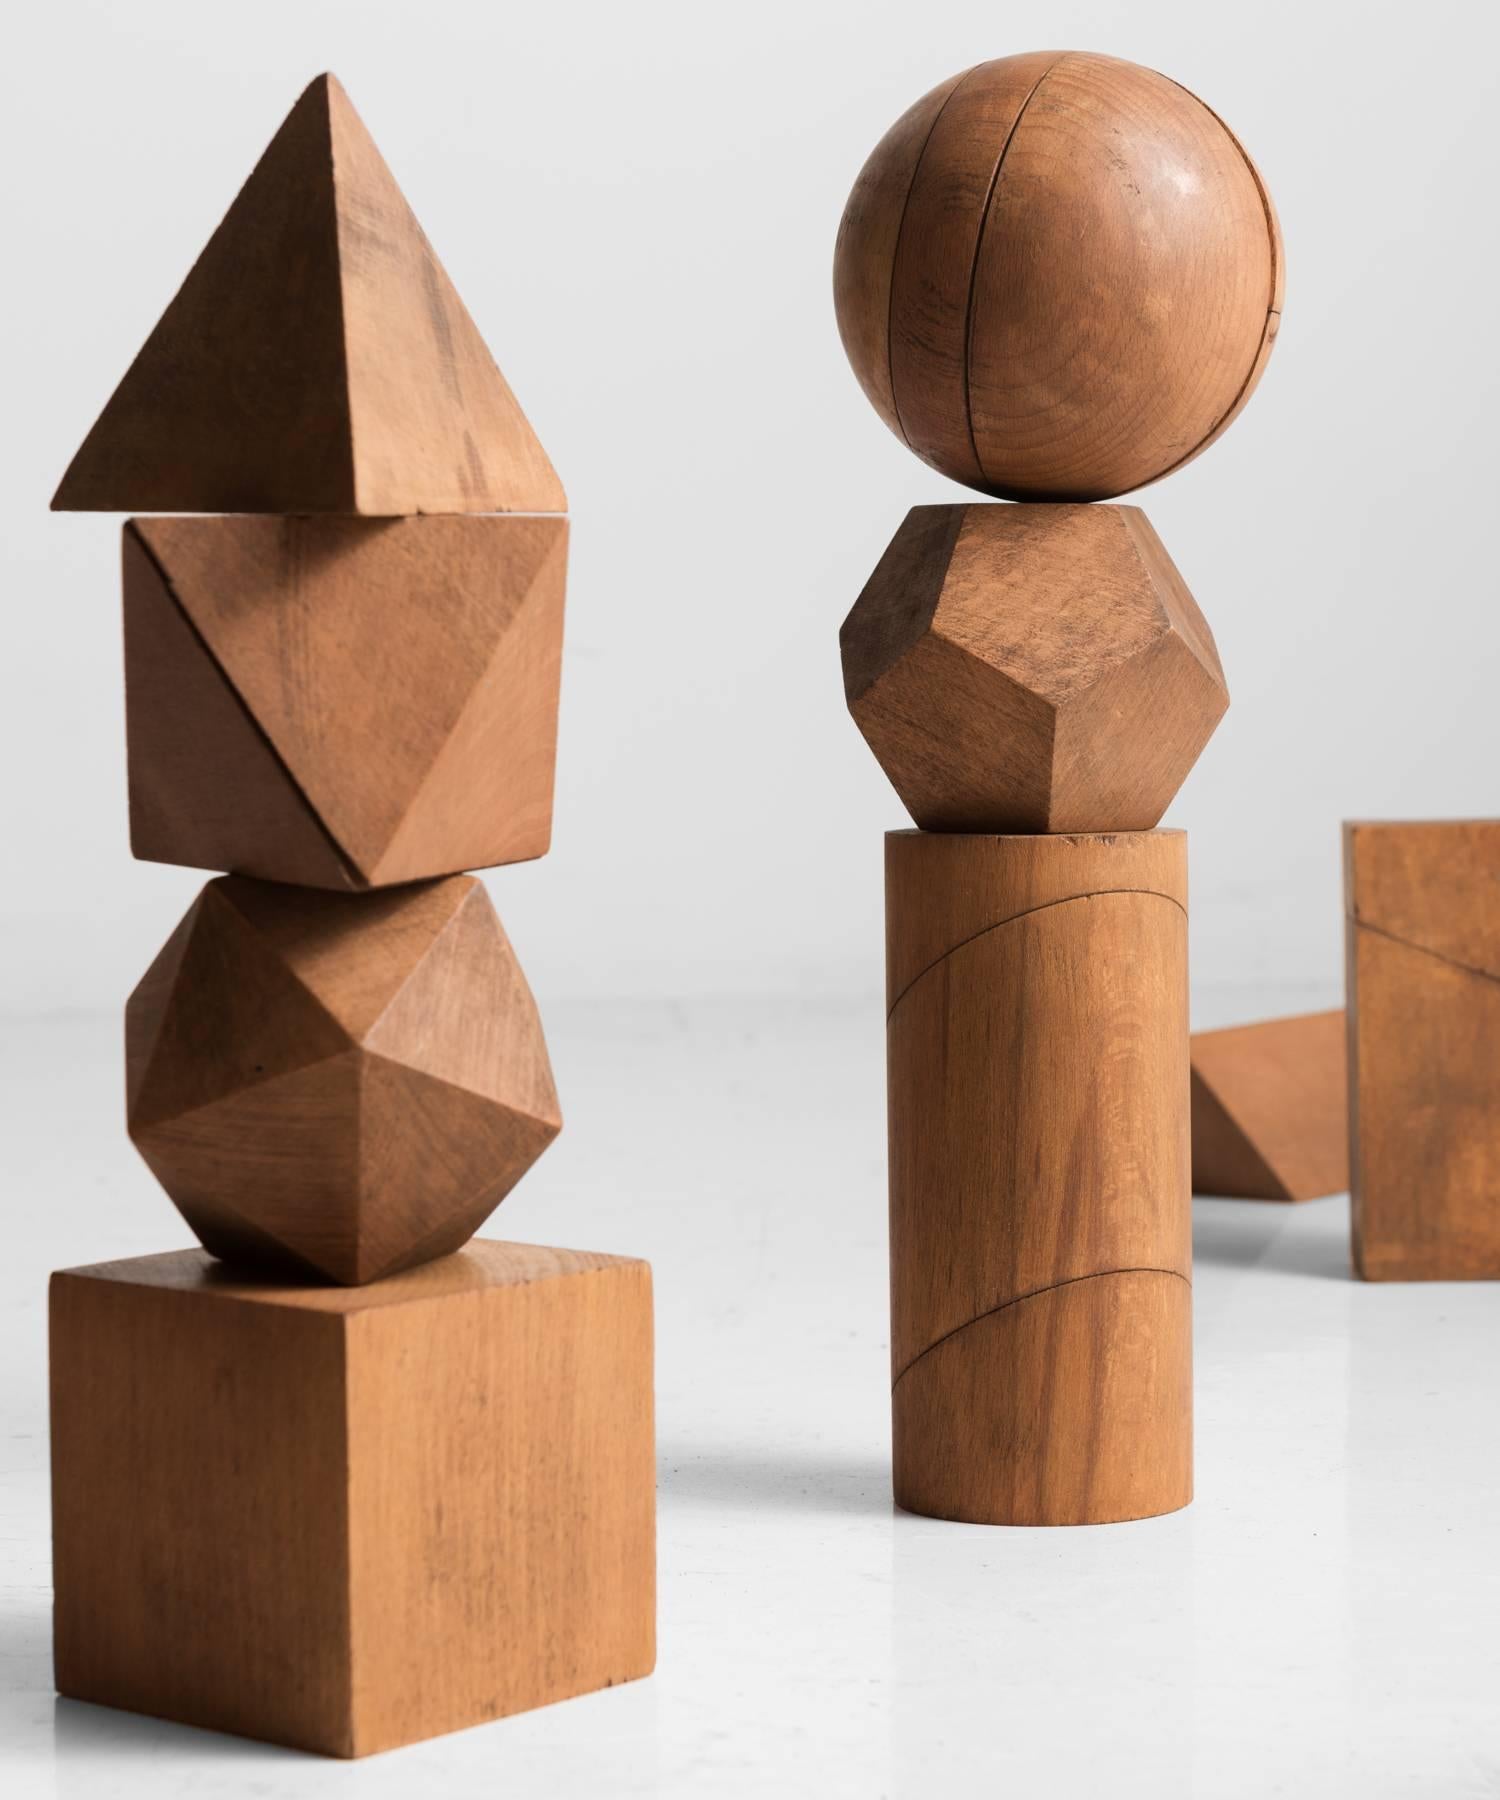 Carved Complete Set of Wooden Geometric Forms, circa 1957